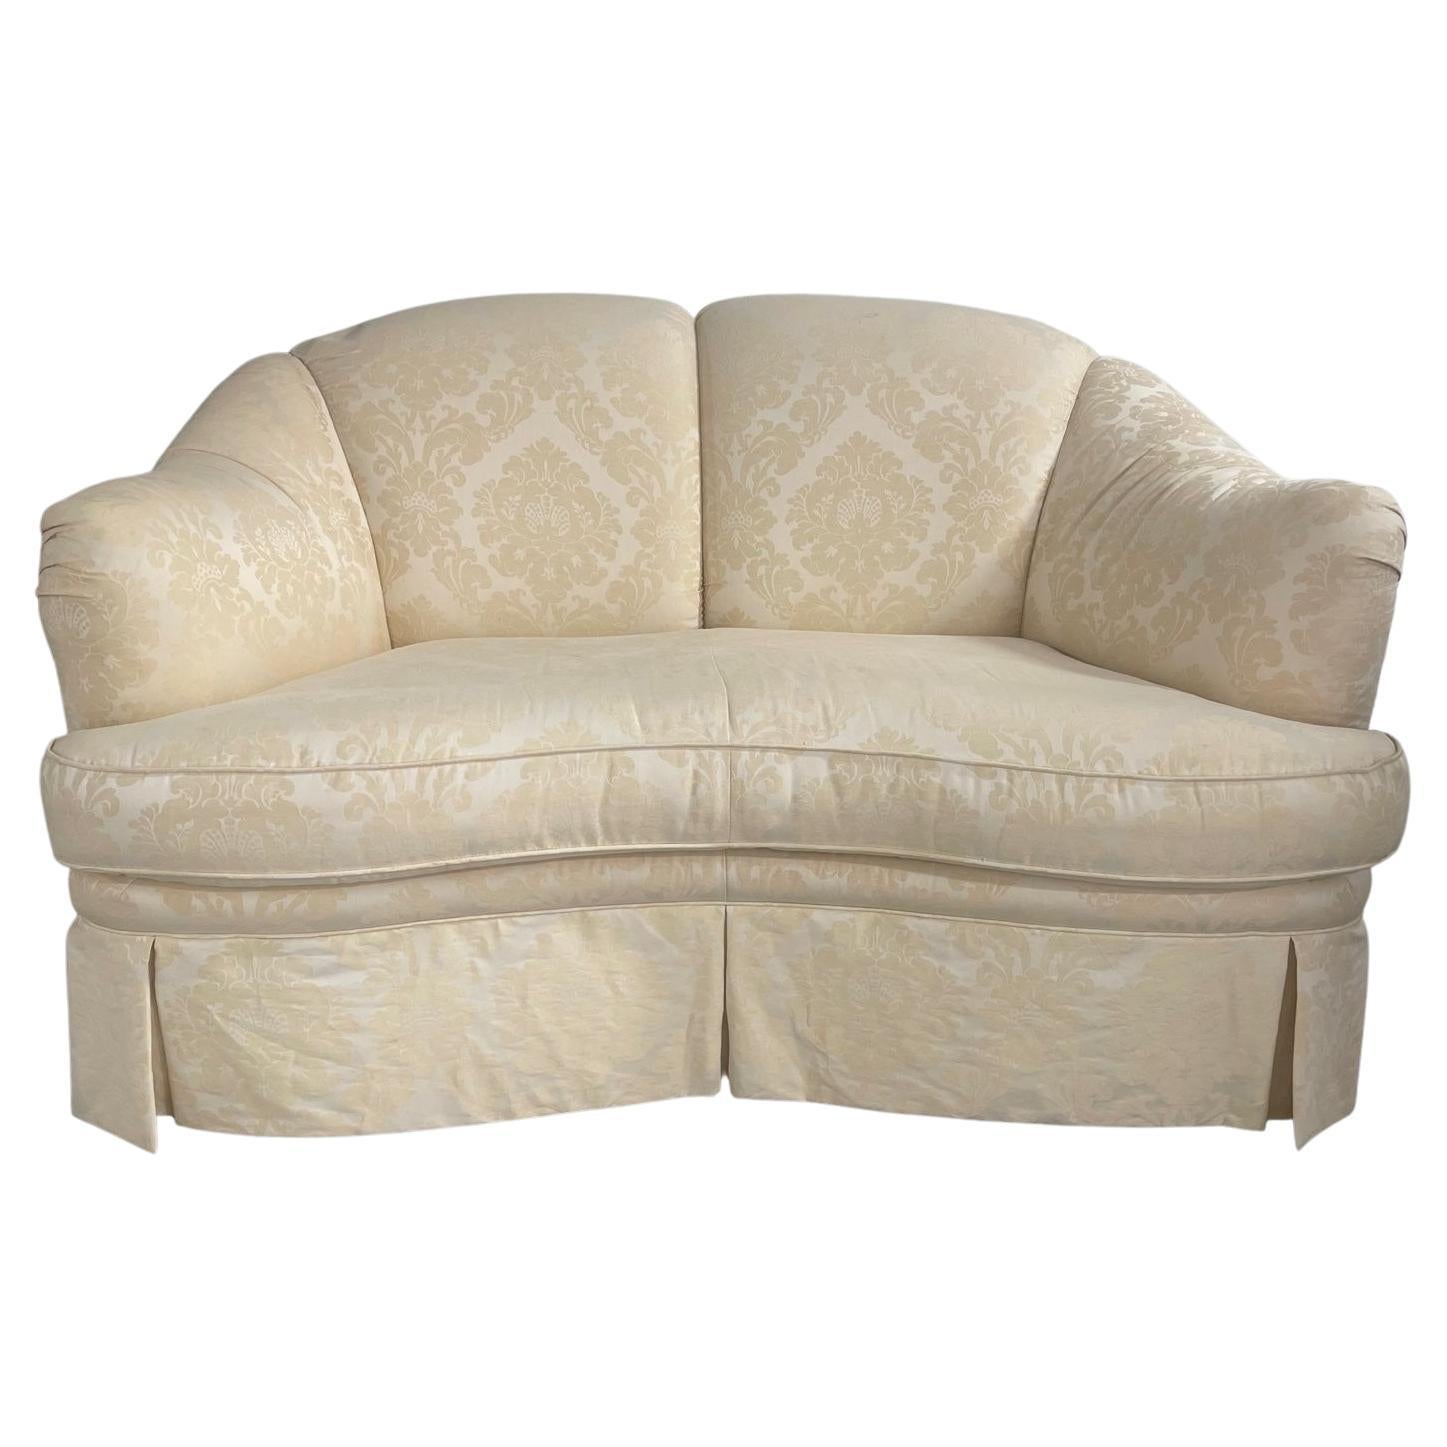 English Scalloped Style Loveseat with a Serpentine Front, 20th Century